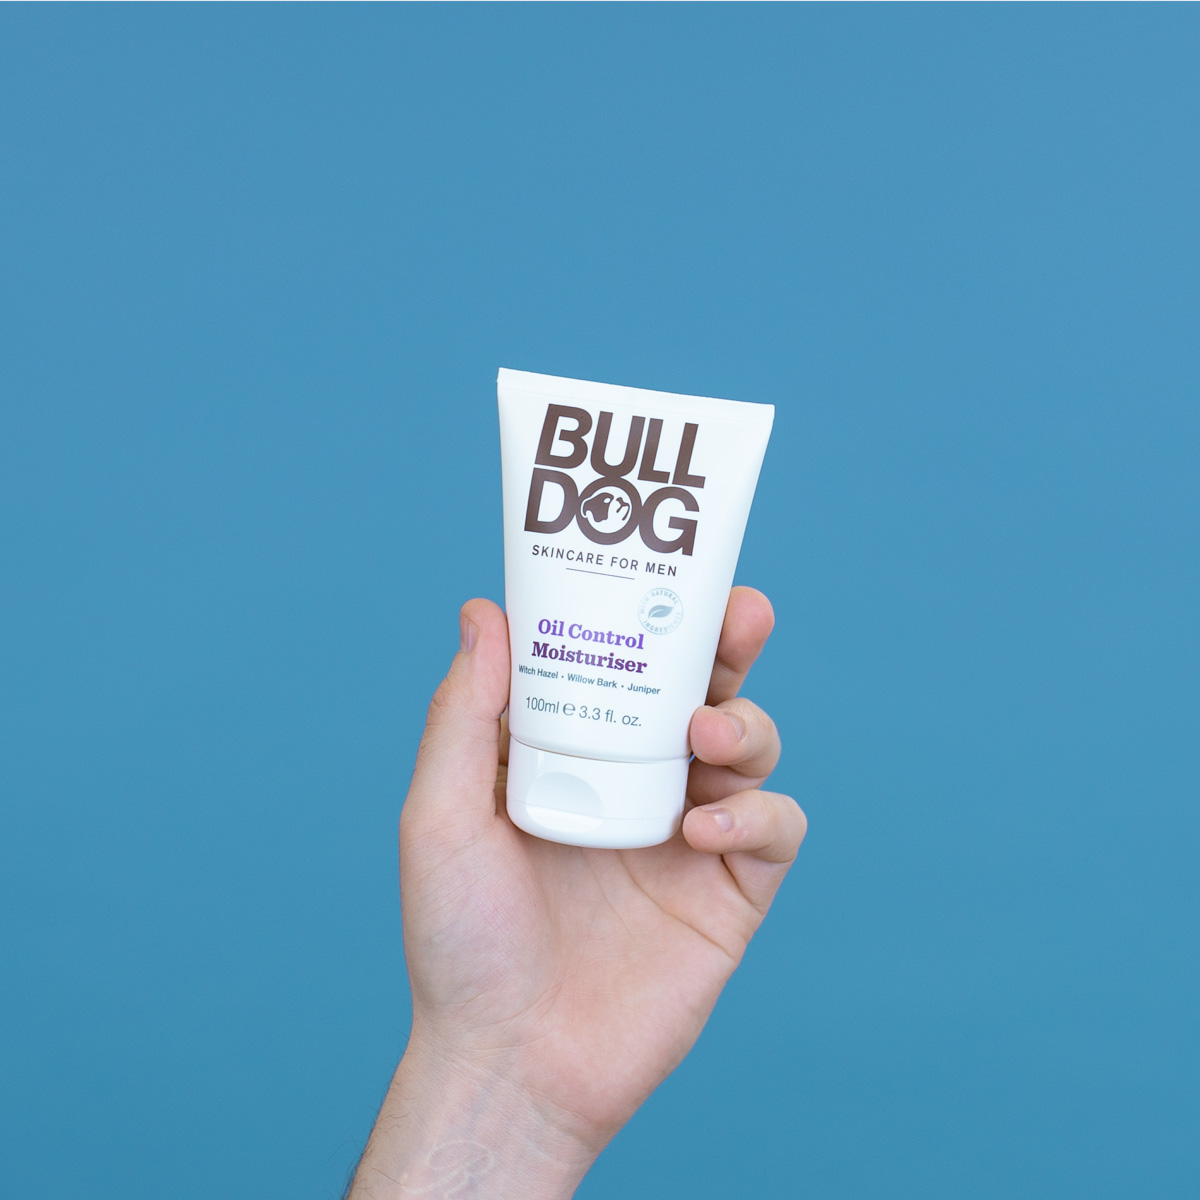 Bulldog Skincare; a sustainable brand, made by men for men ...